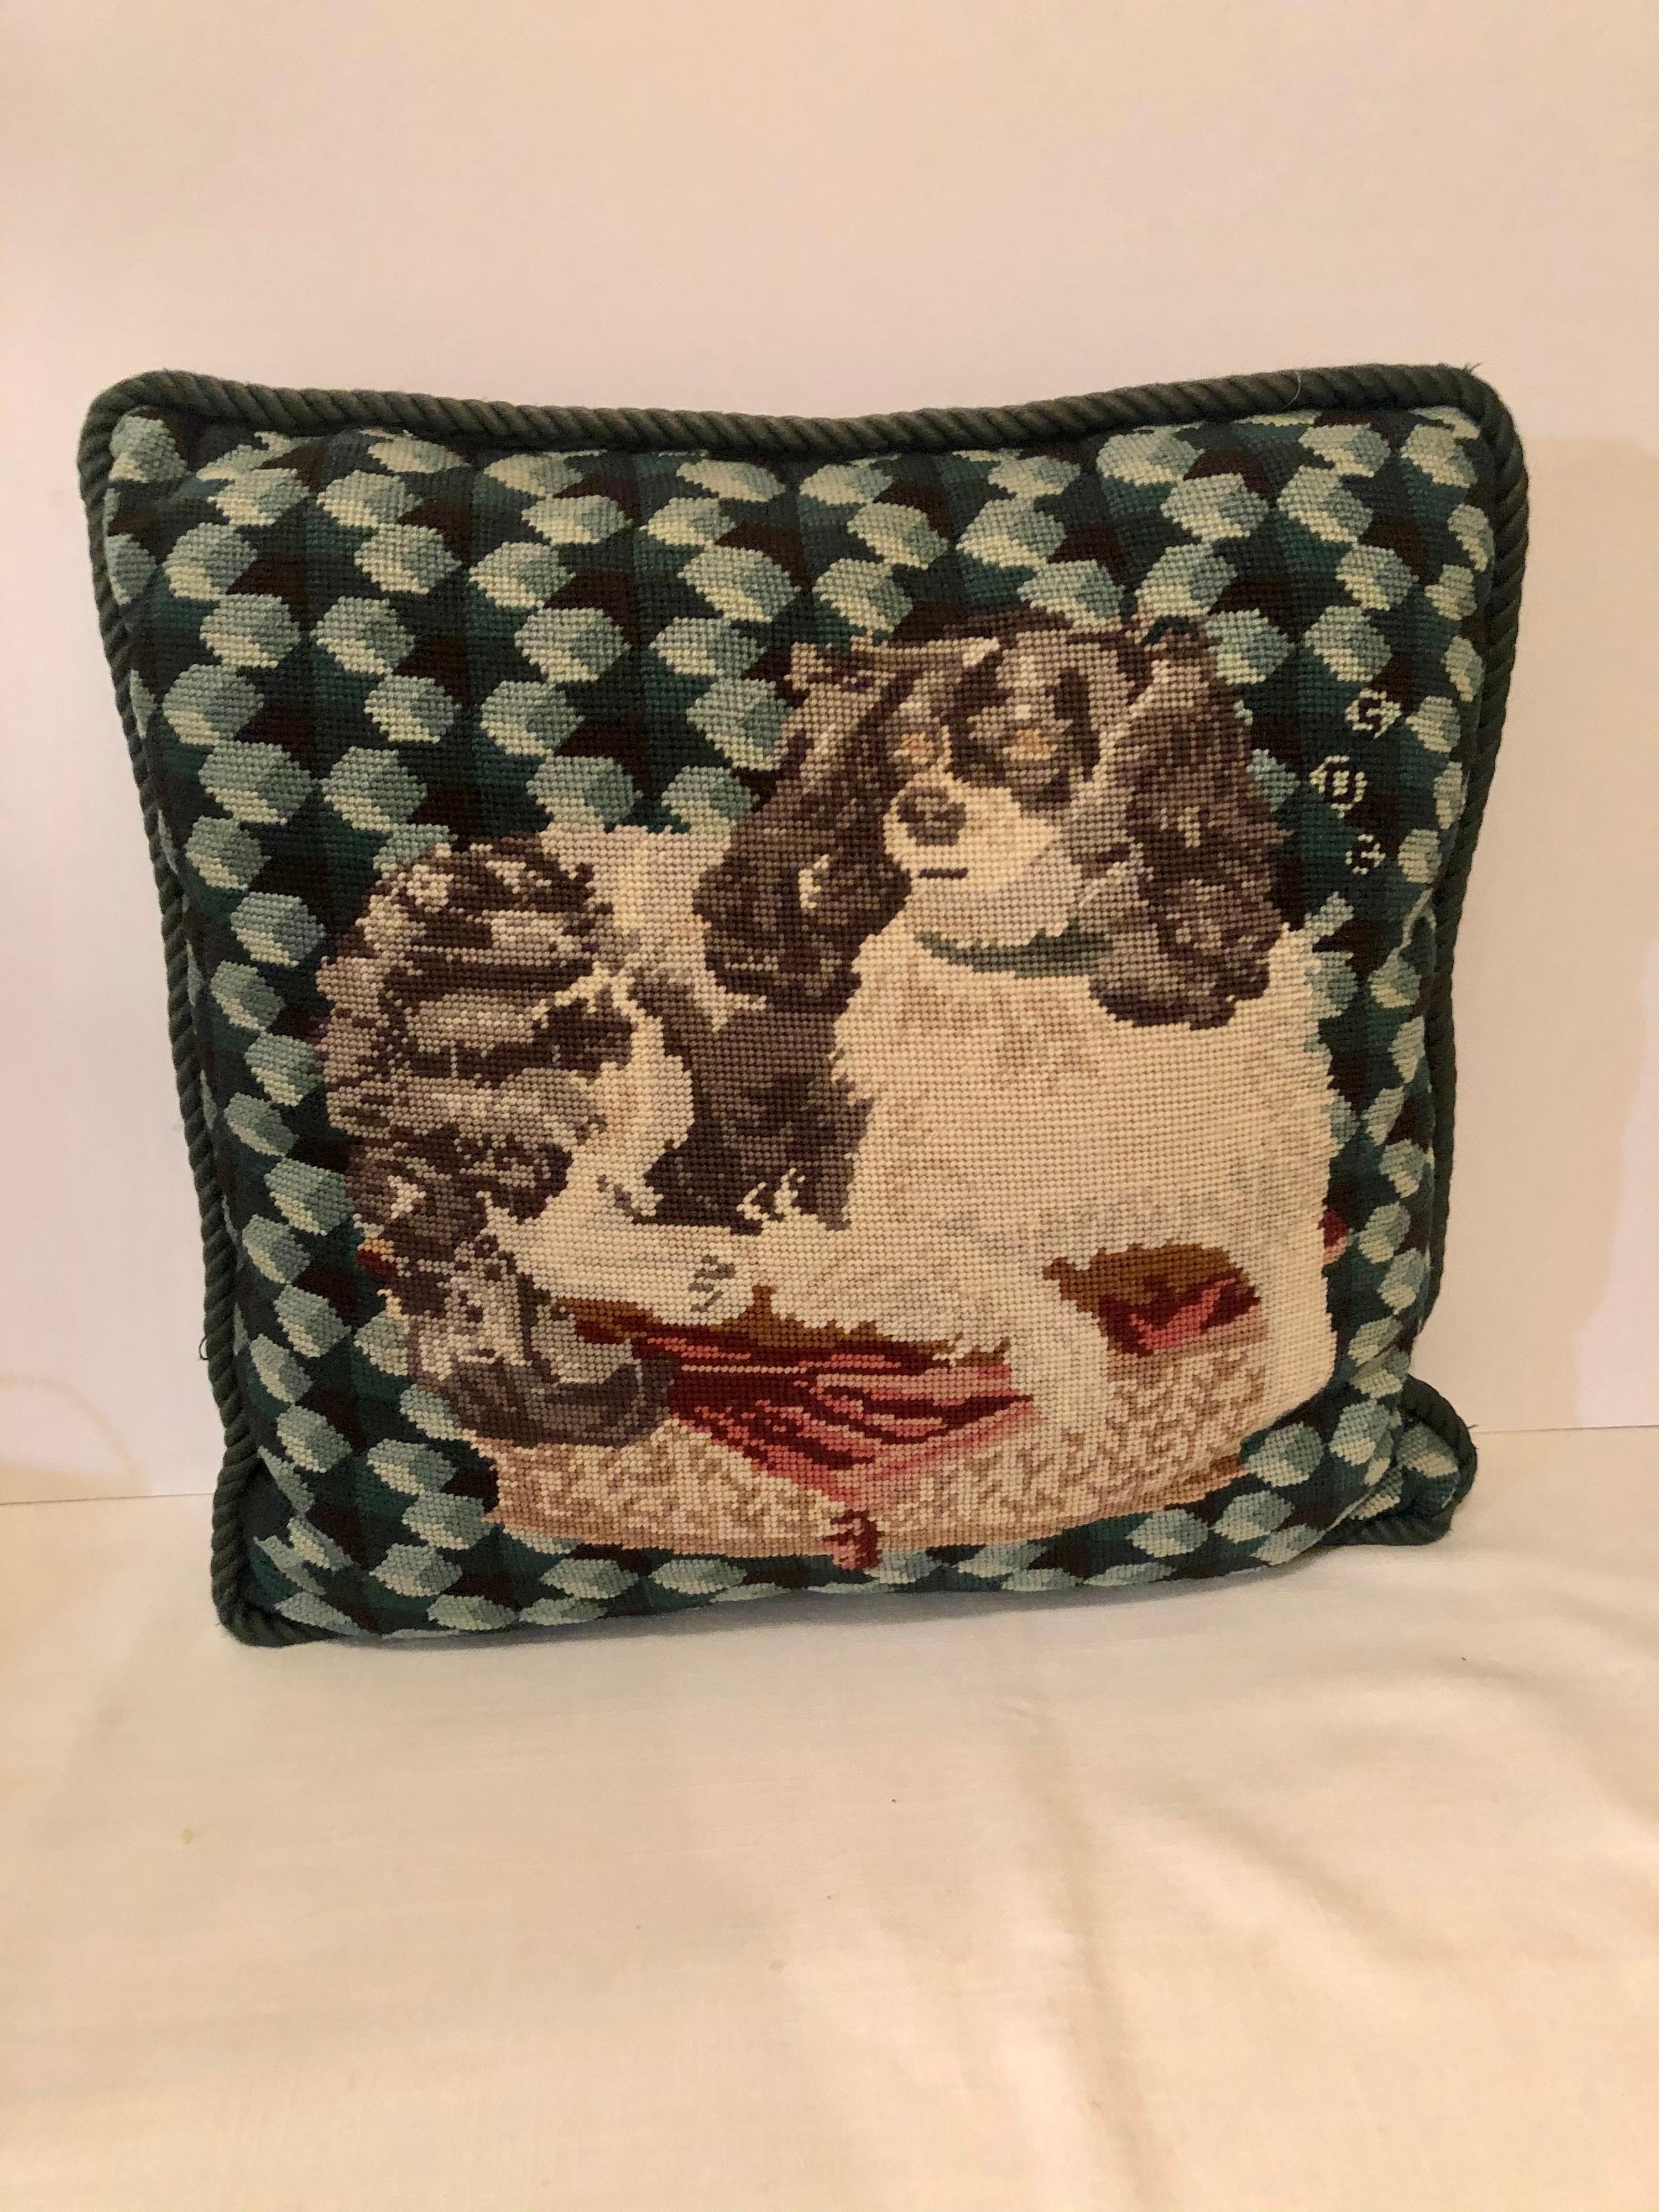 Victorian Enchanting Needlepoint Pillow Decorated with a Cavalier King Charles Spaniel